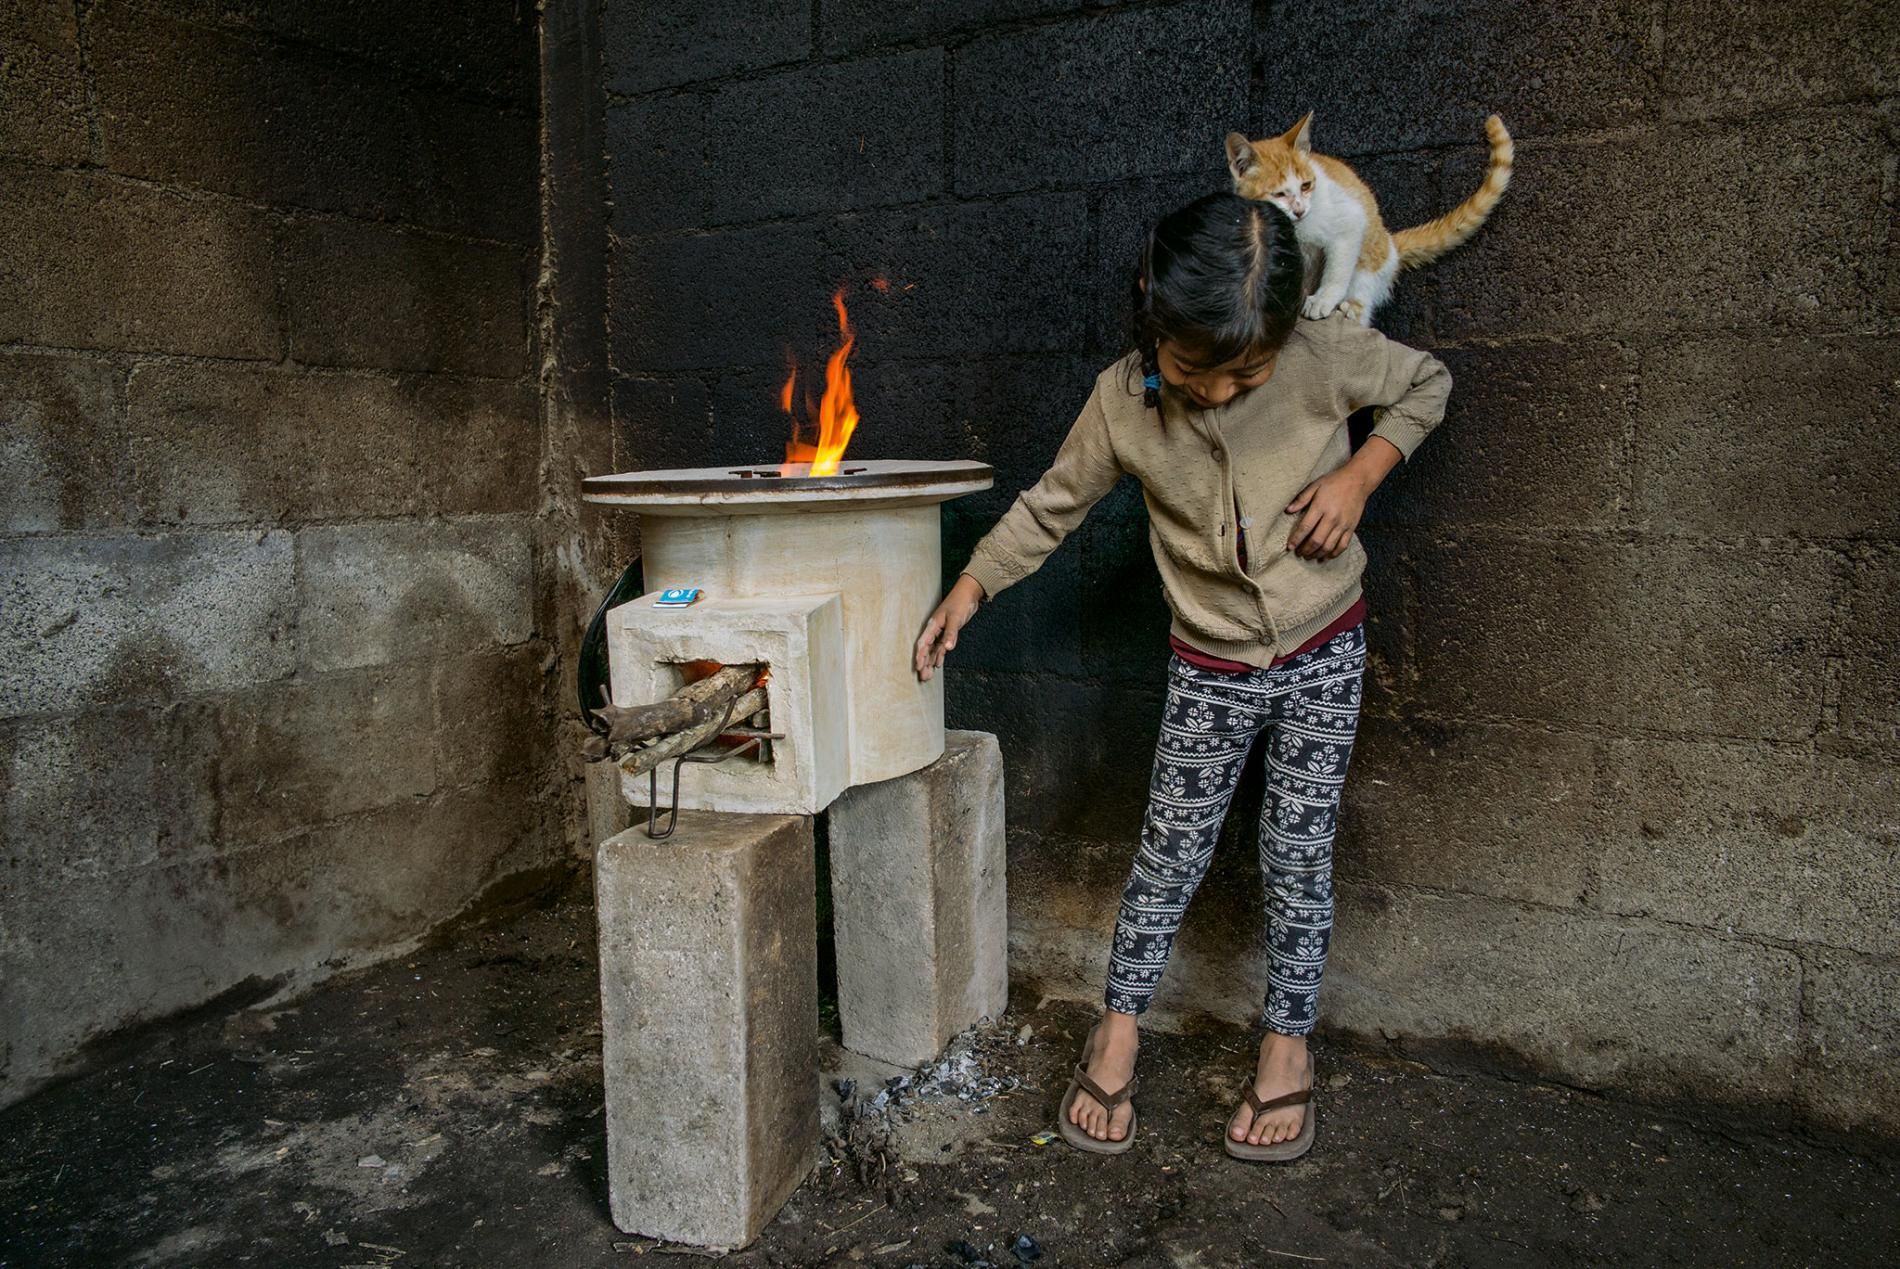 Tania López, seven, plays with her cat in a room whose walls were blackened by an old open fire; the new stove, provided by StoveTeam International, is efficient and safe to touch. Image by Lynn Johnson. Guatemala, 2017.